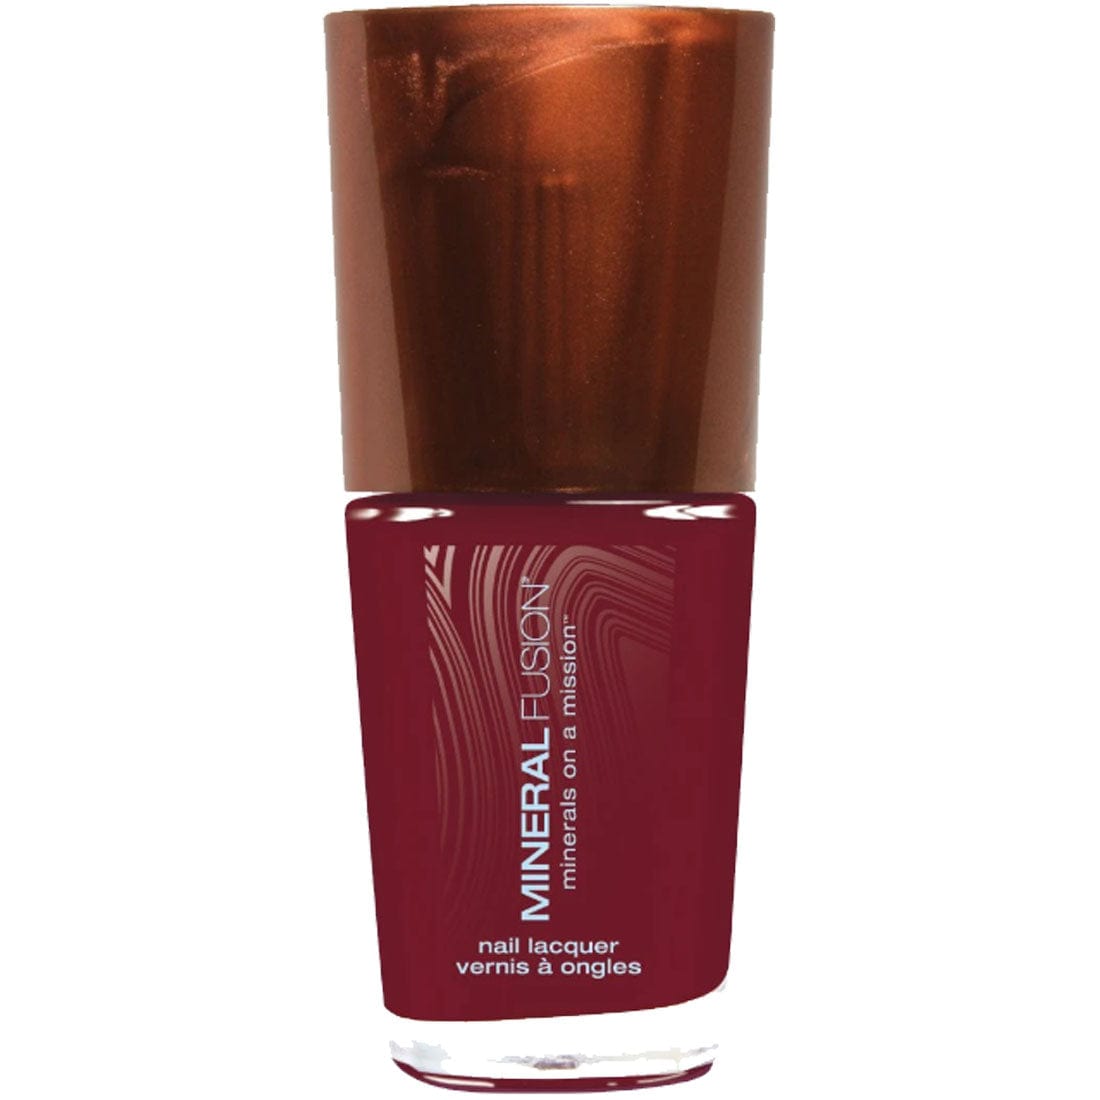 Mineral Fusion Nail Polish Mulberry, 10mL, Clearance 35% Off, Final Sale